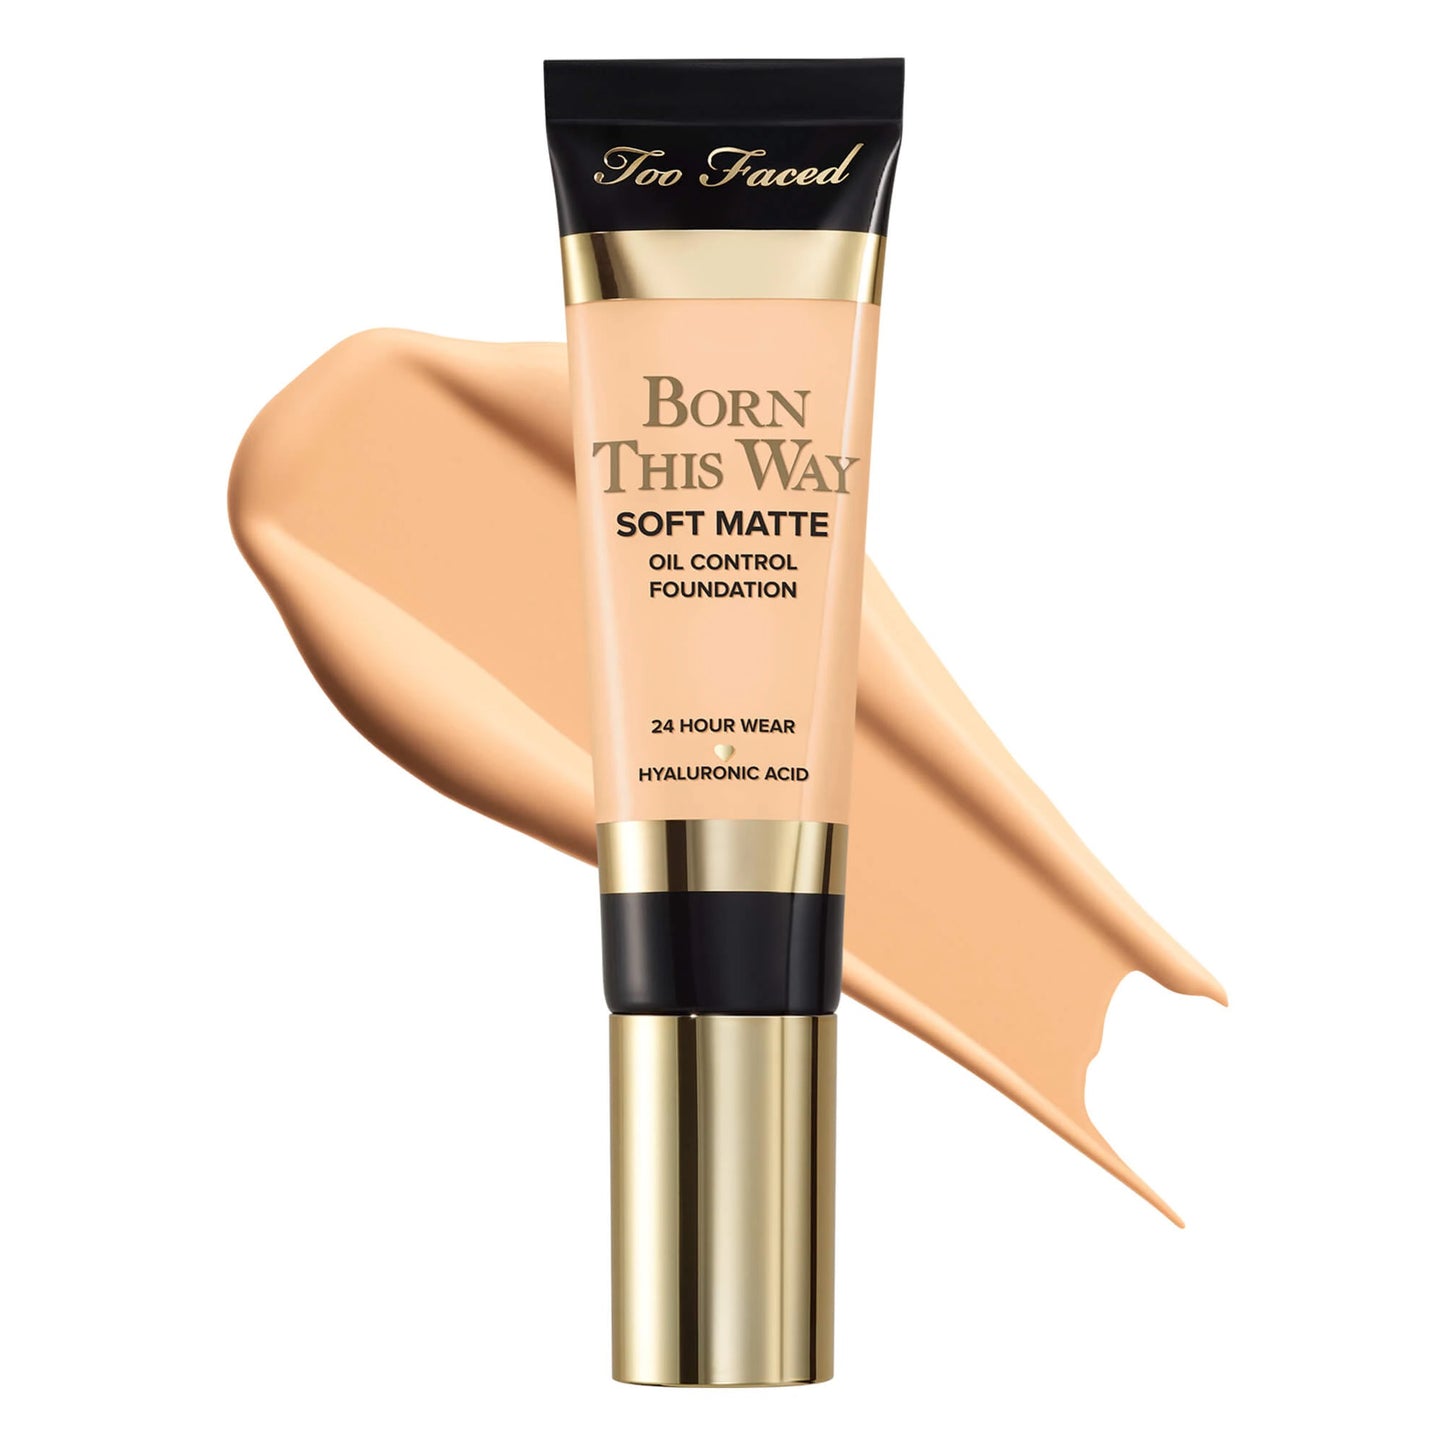 Too Faced Born This Way Soft Matte Foundation 30ml - Ivory